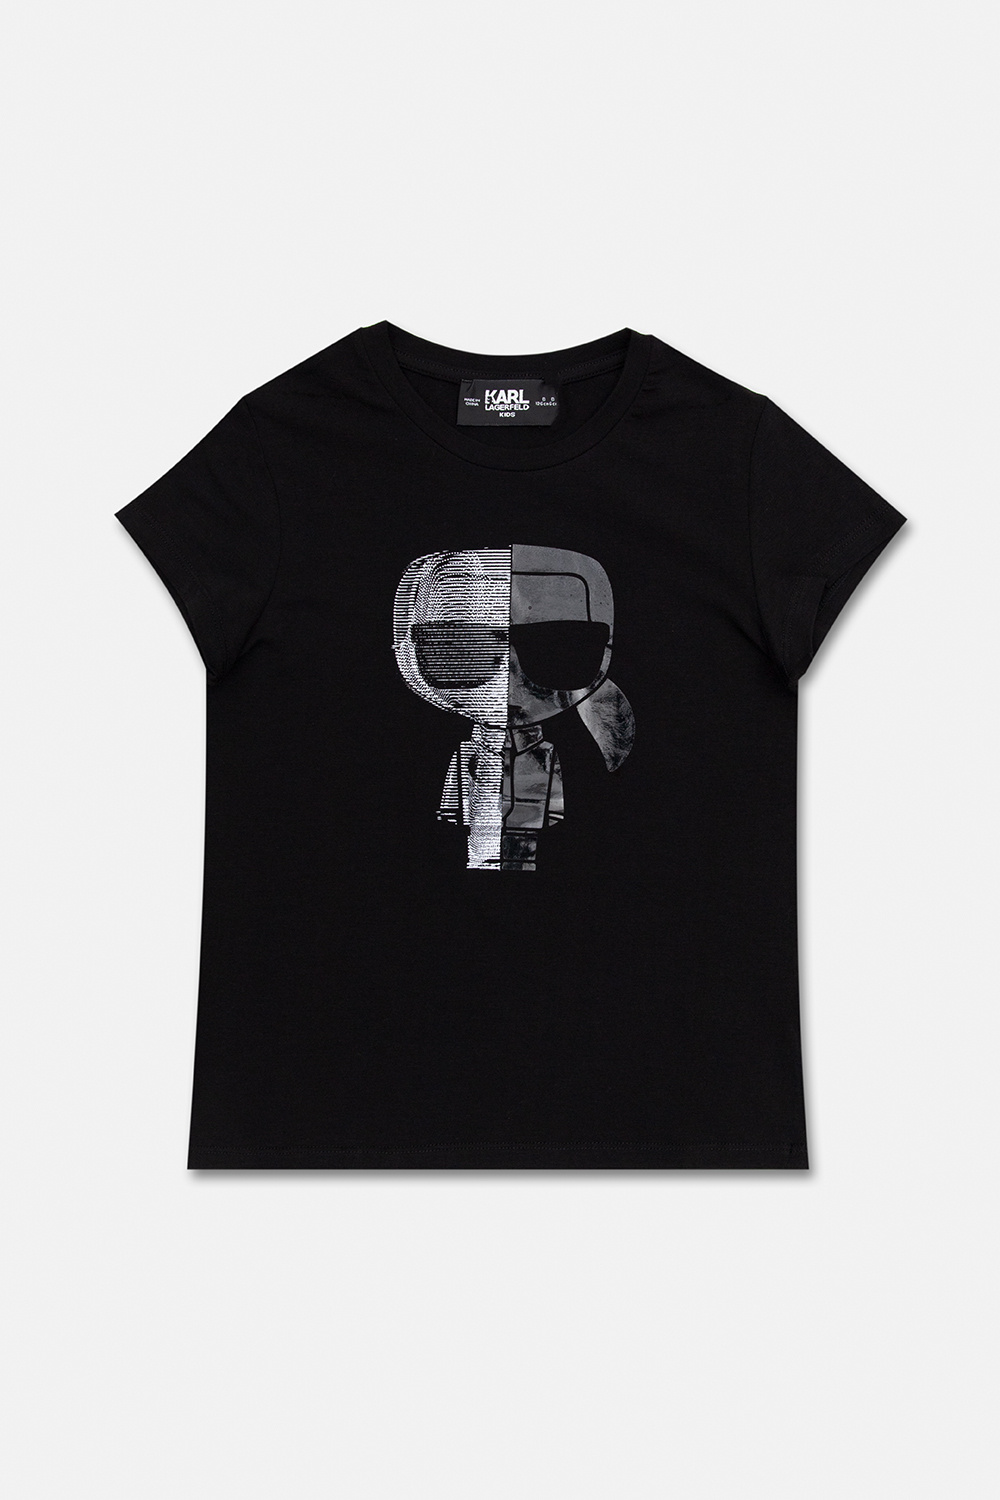 Karl Lagerfeld Kids FREE shirts in Chicago to celebrate your champ and MVP